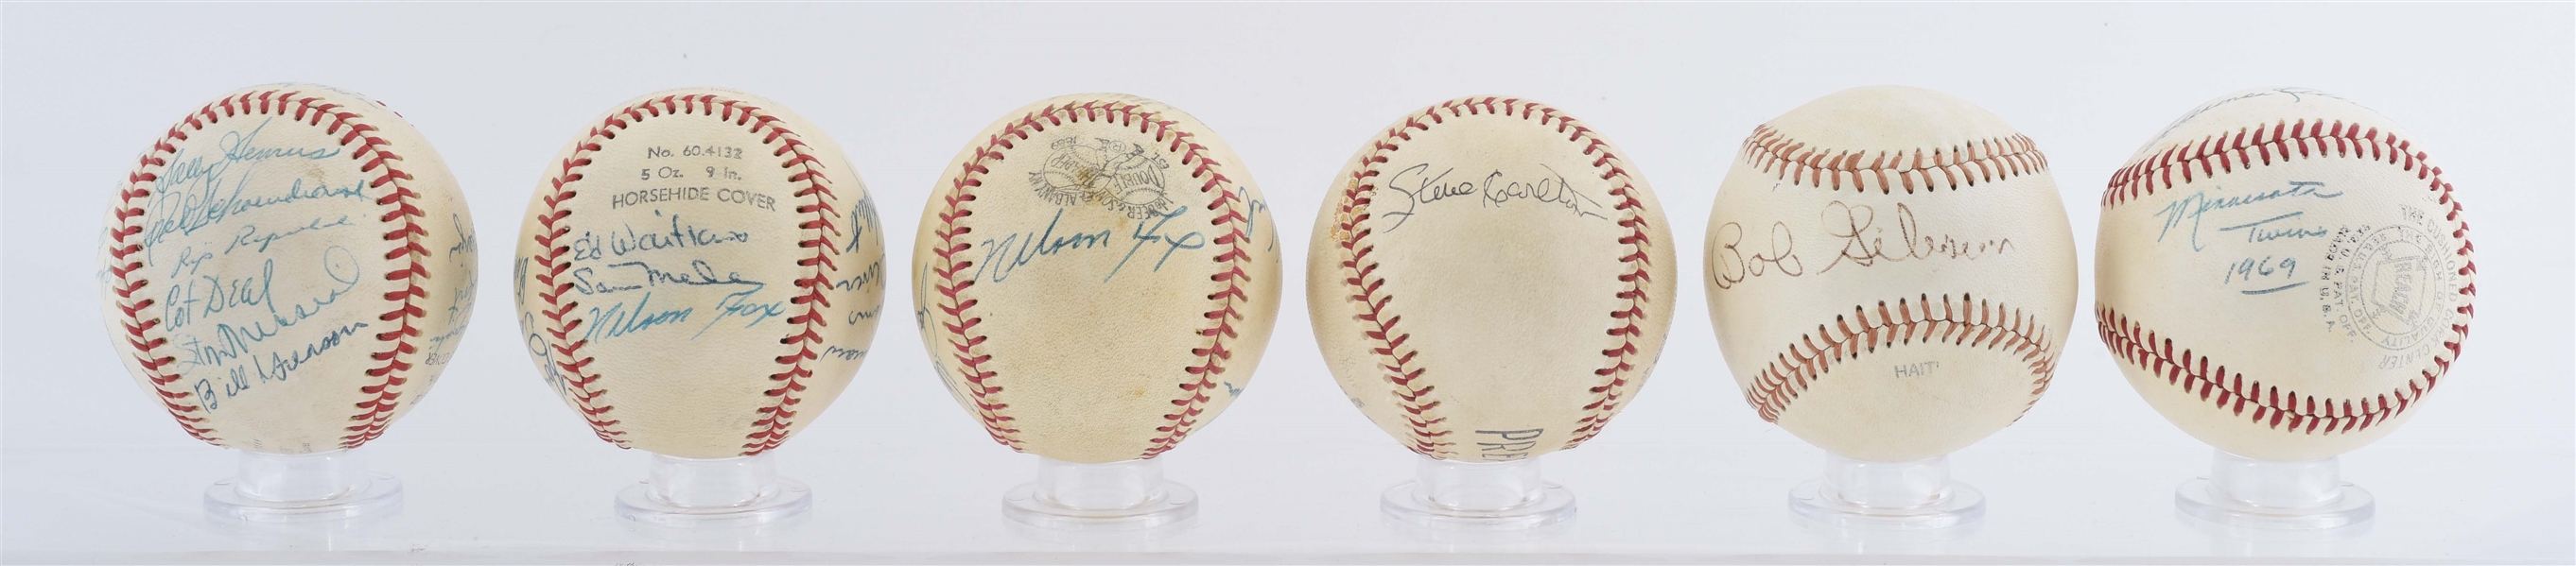 LOT OF 6: SIGNED BASEBALL COLLECTION INCLUDING VINTAGE SINGLES.